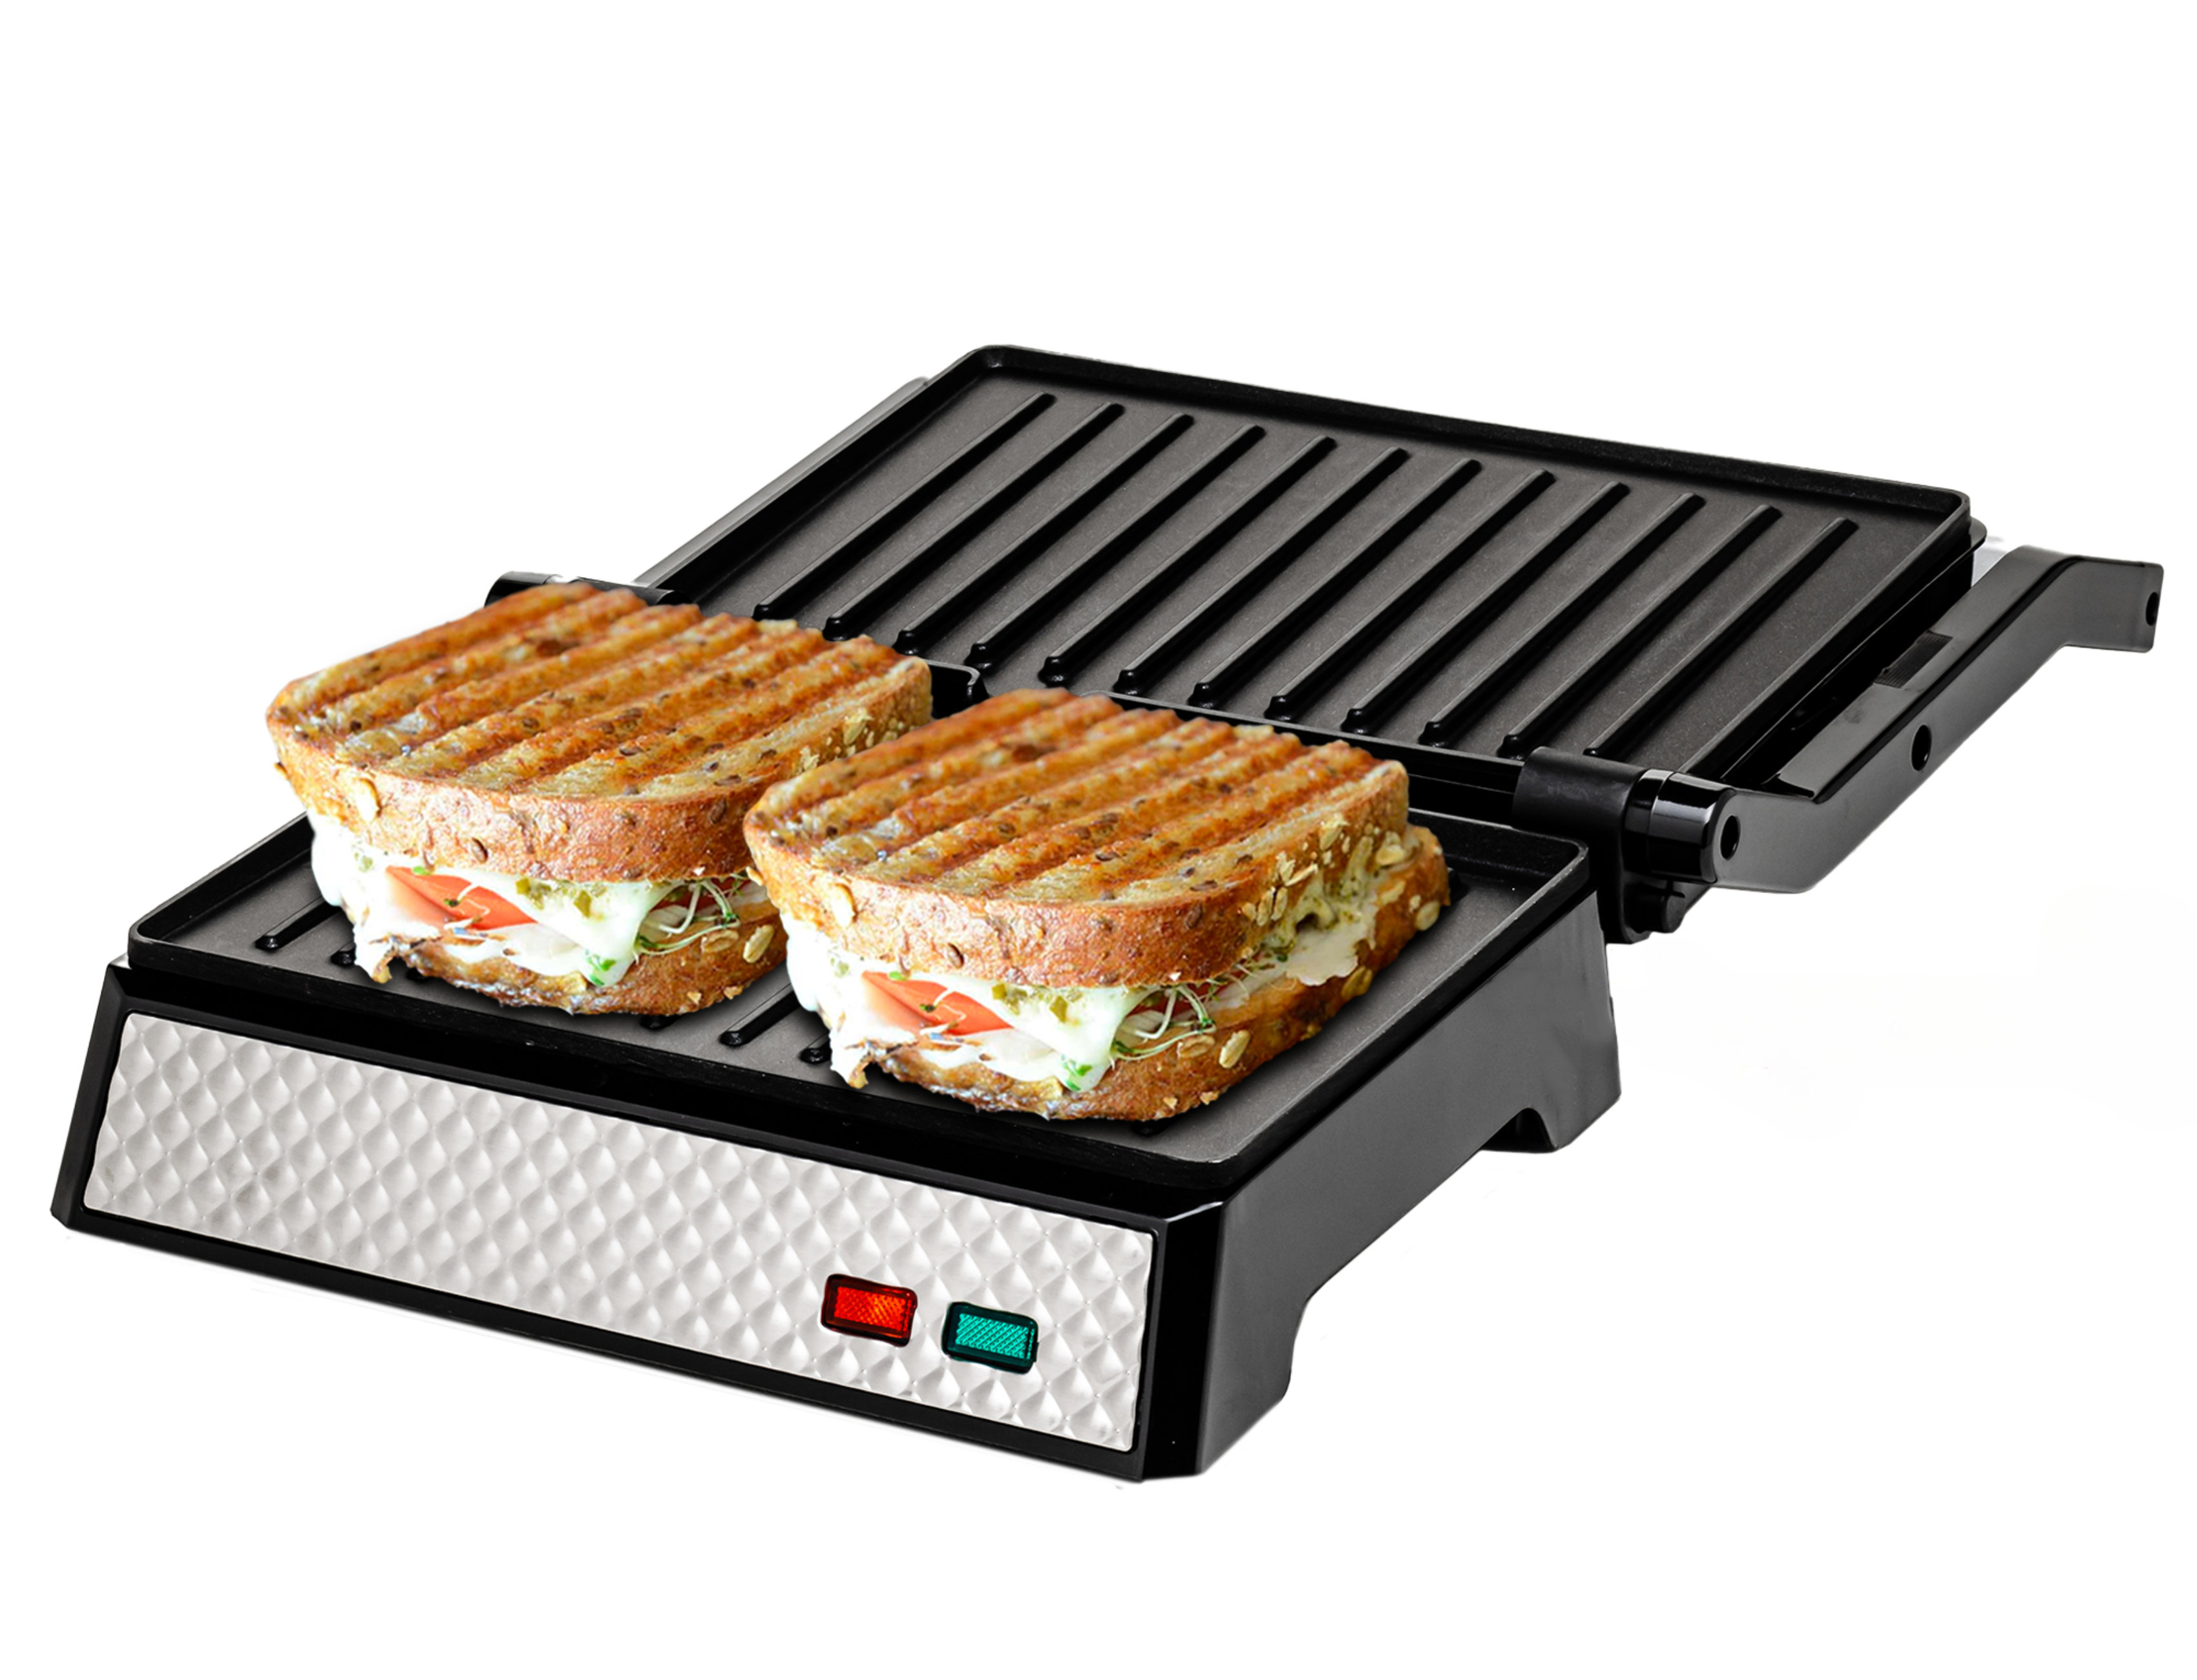 Dash Mini Maker Portable Grill Machine + Panini Press for Gourmet Burgers,  Sandwiches, Chicken + Other On the Go Breakfast, Lunch, or Snacks with  Recipe Guide - White 